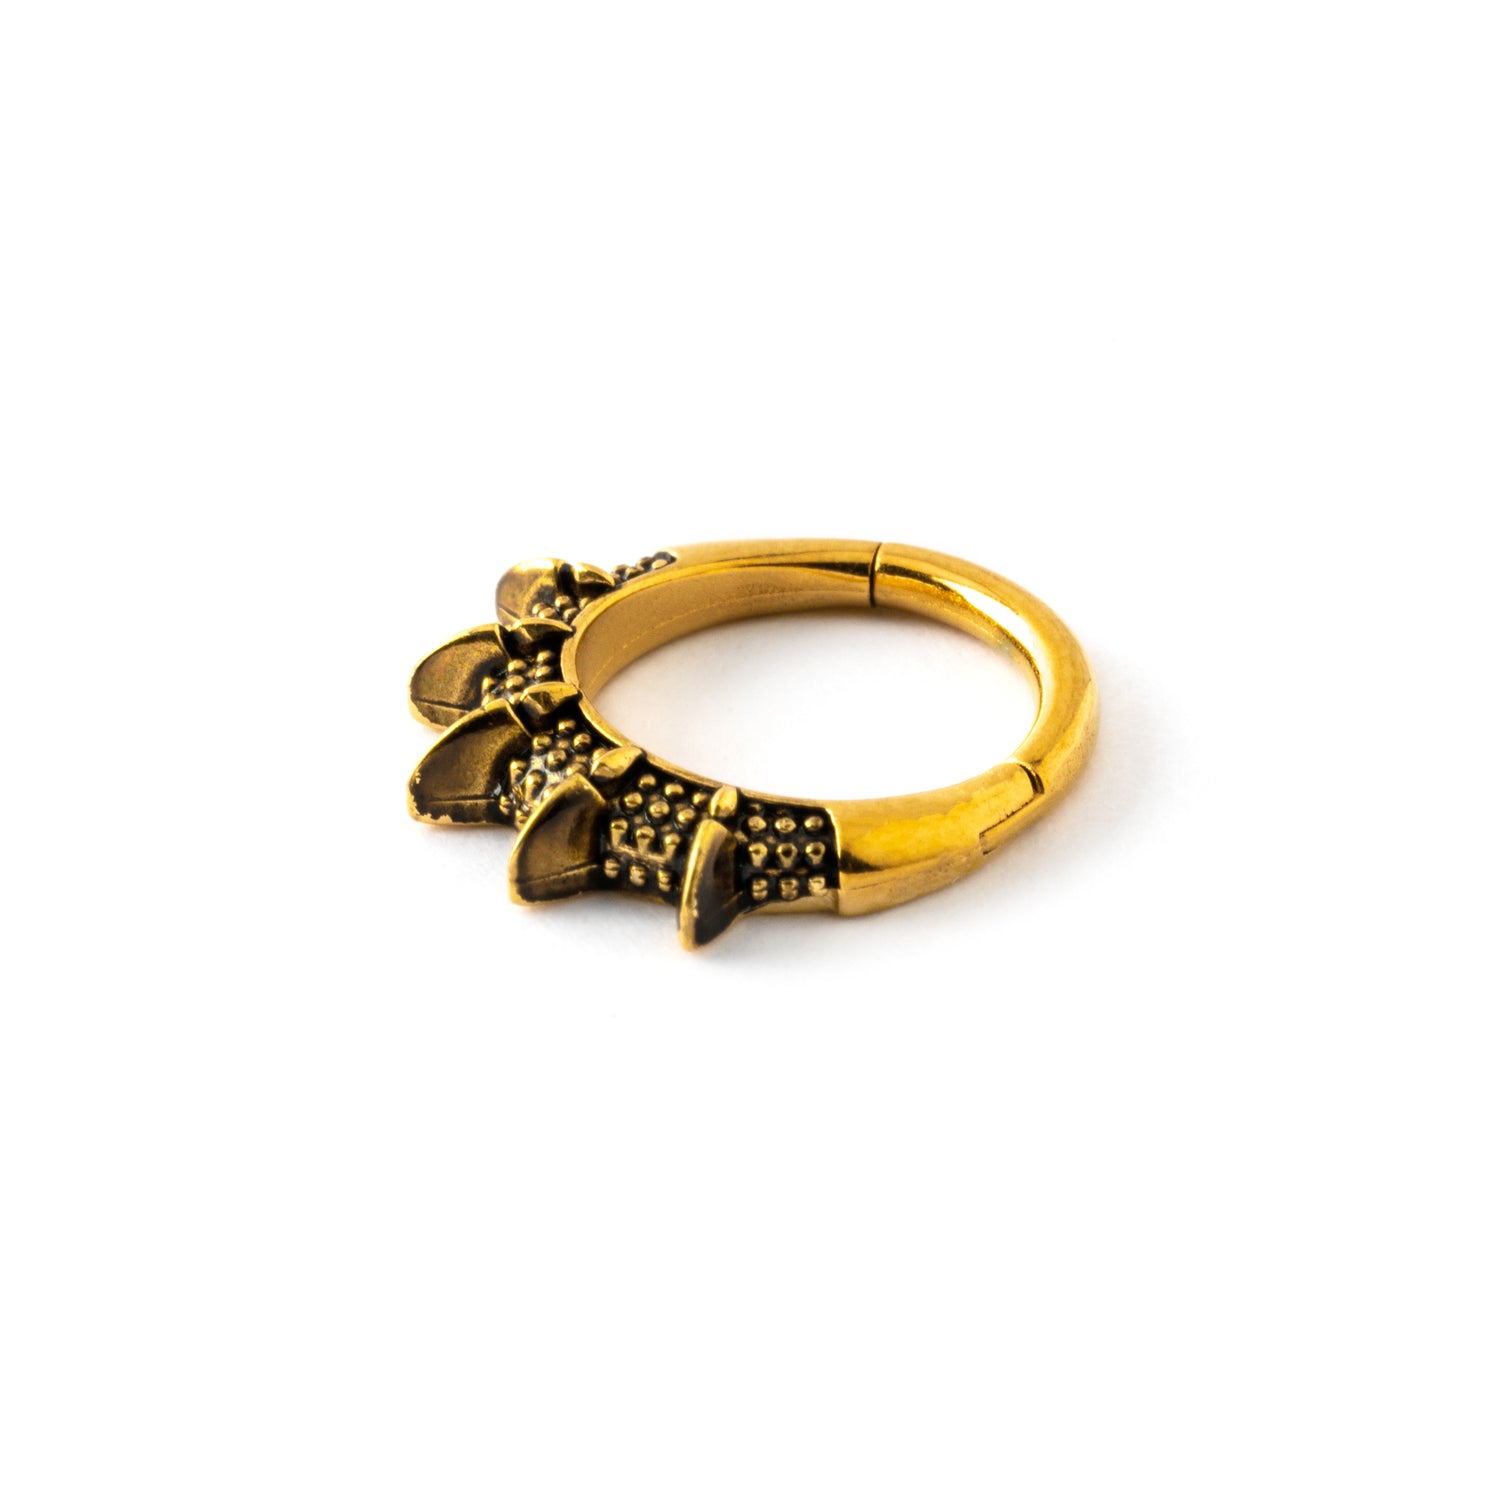 antique gold colour spiky septum clicker ring down view